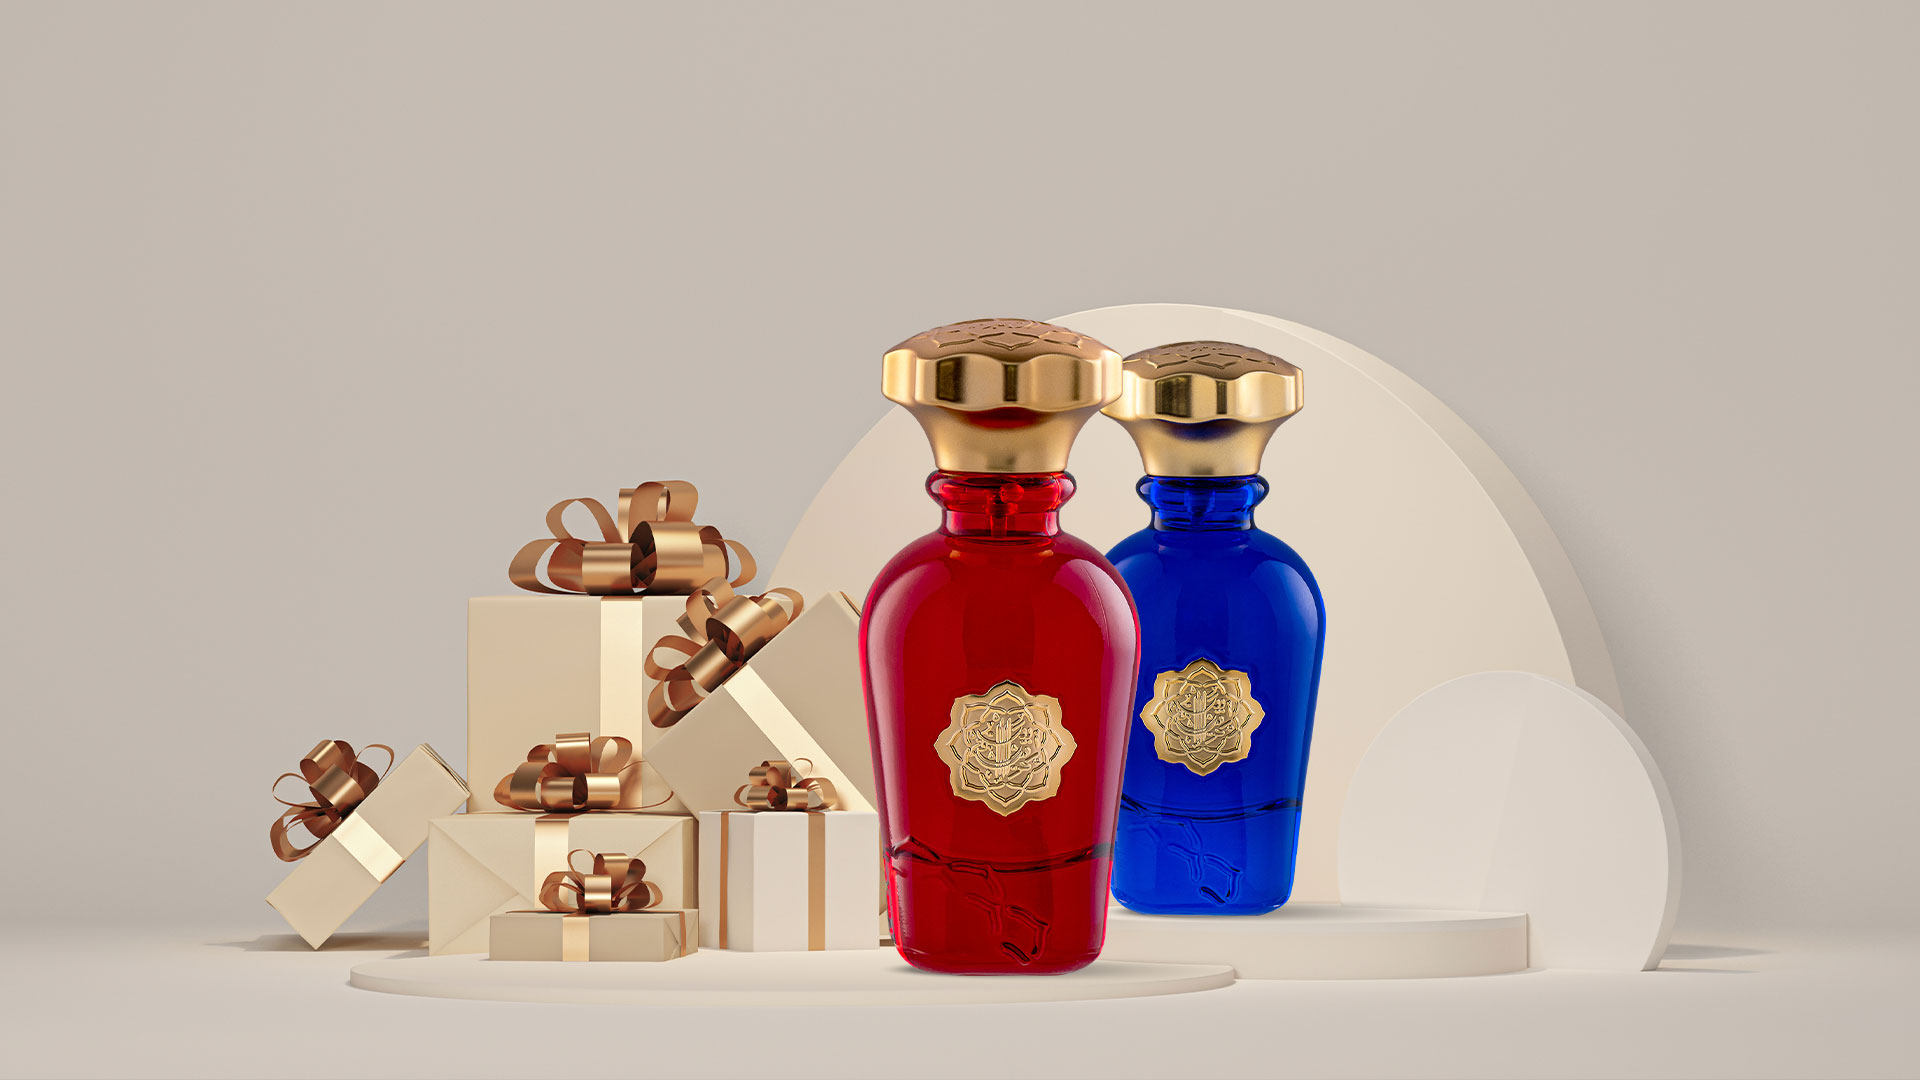 Can Branded Perfumes Be a Good Choice for Gifts and Special Occasions? ​